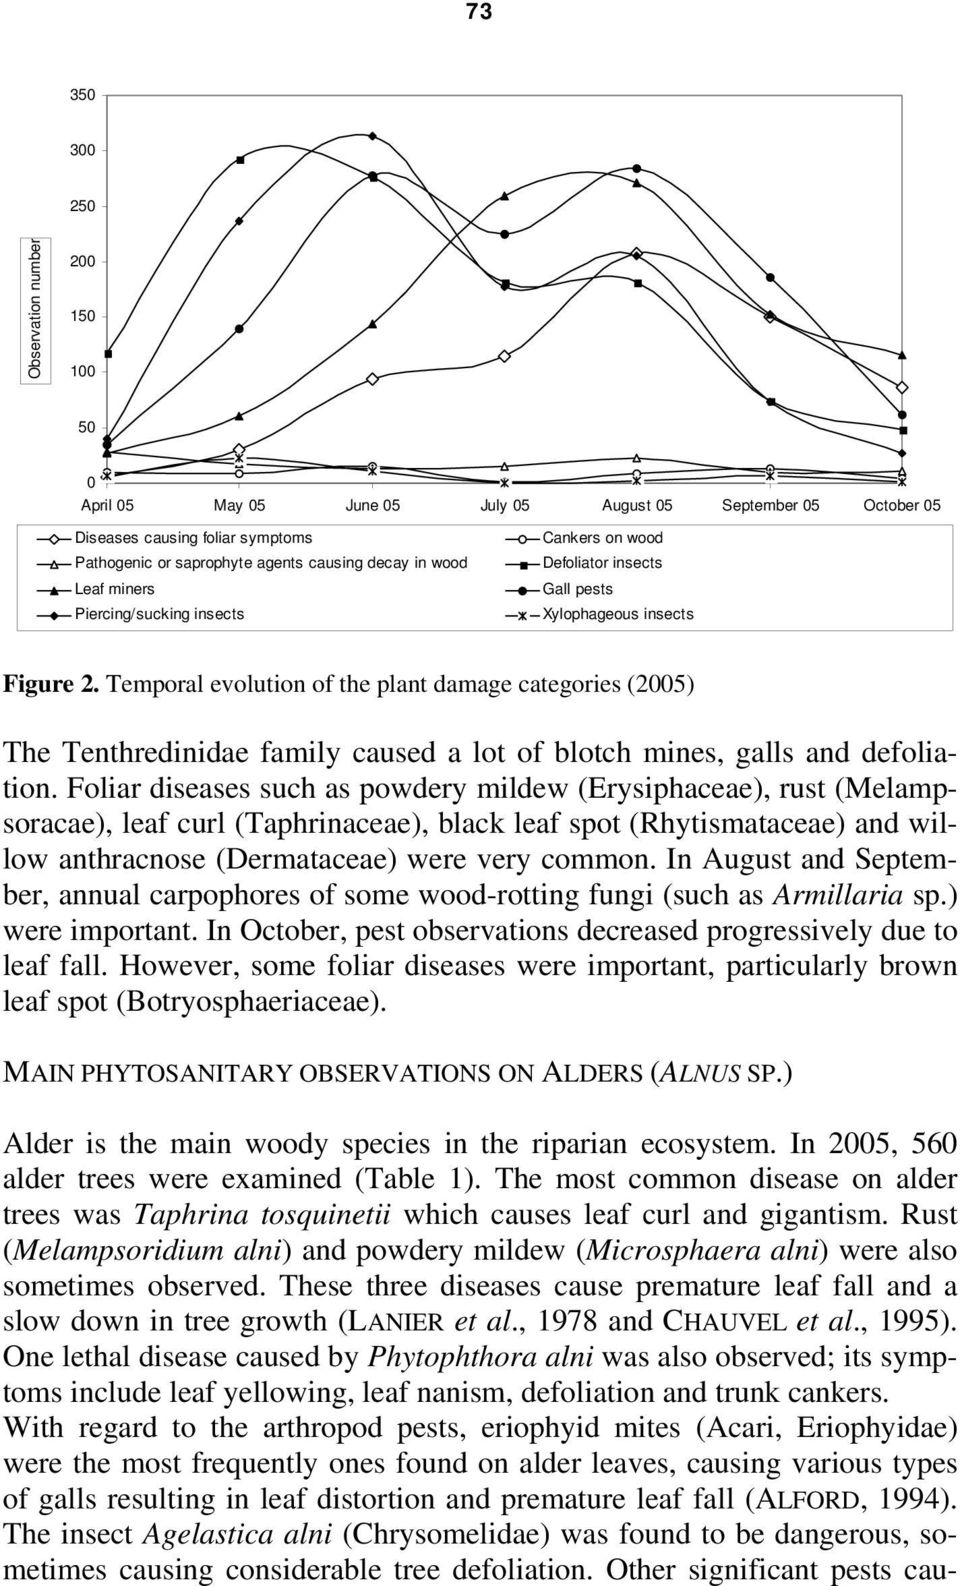 Temporal evolution of the plant damage categories (2005) The Tenthredinidae family caused a lot of blotch mines, galls and defoliation.